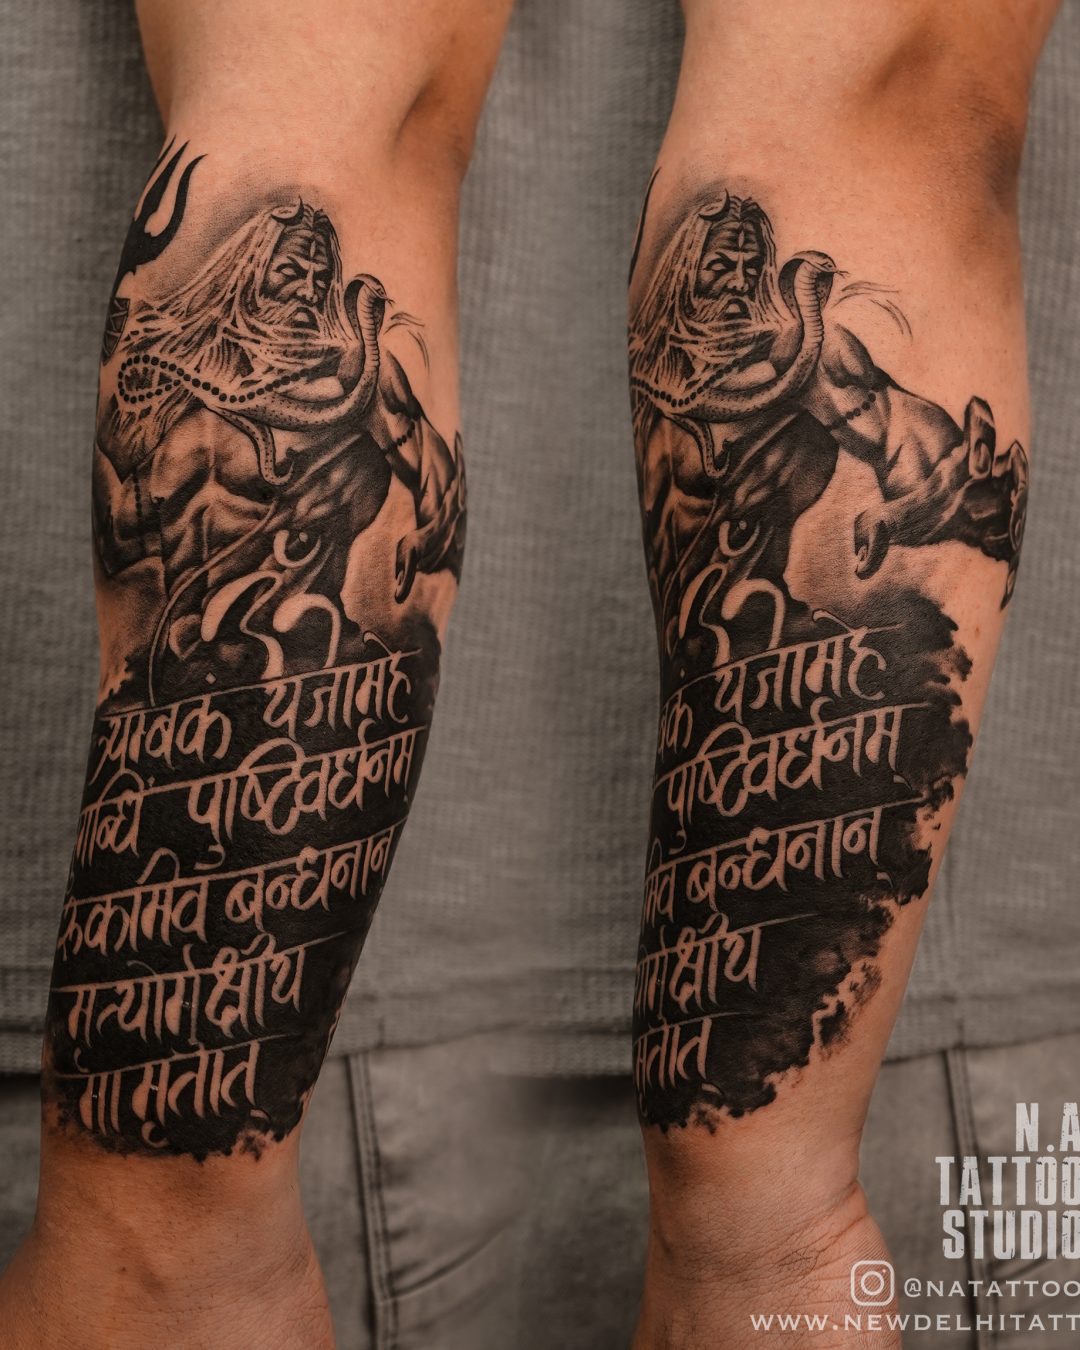 NA Tattoo Studio on Instagram Lord Shiva and Aghori DM US TODAY FOR  YOUR FREE CONSULTATION  By Artist tattoosbyabhishek  For Free Consultations a